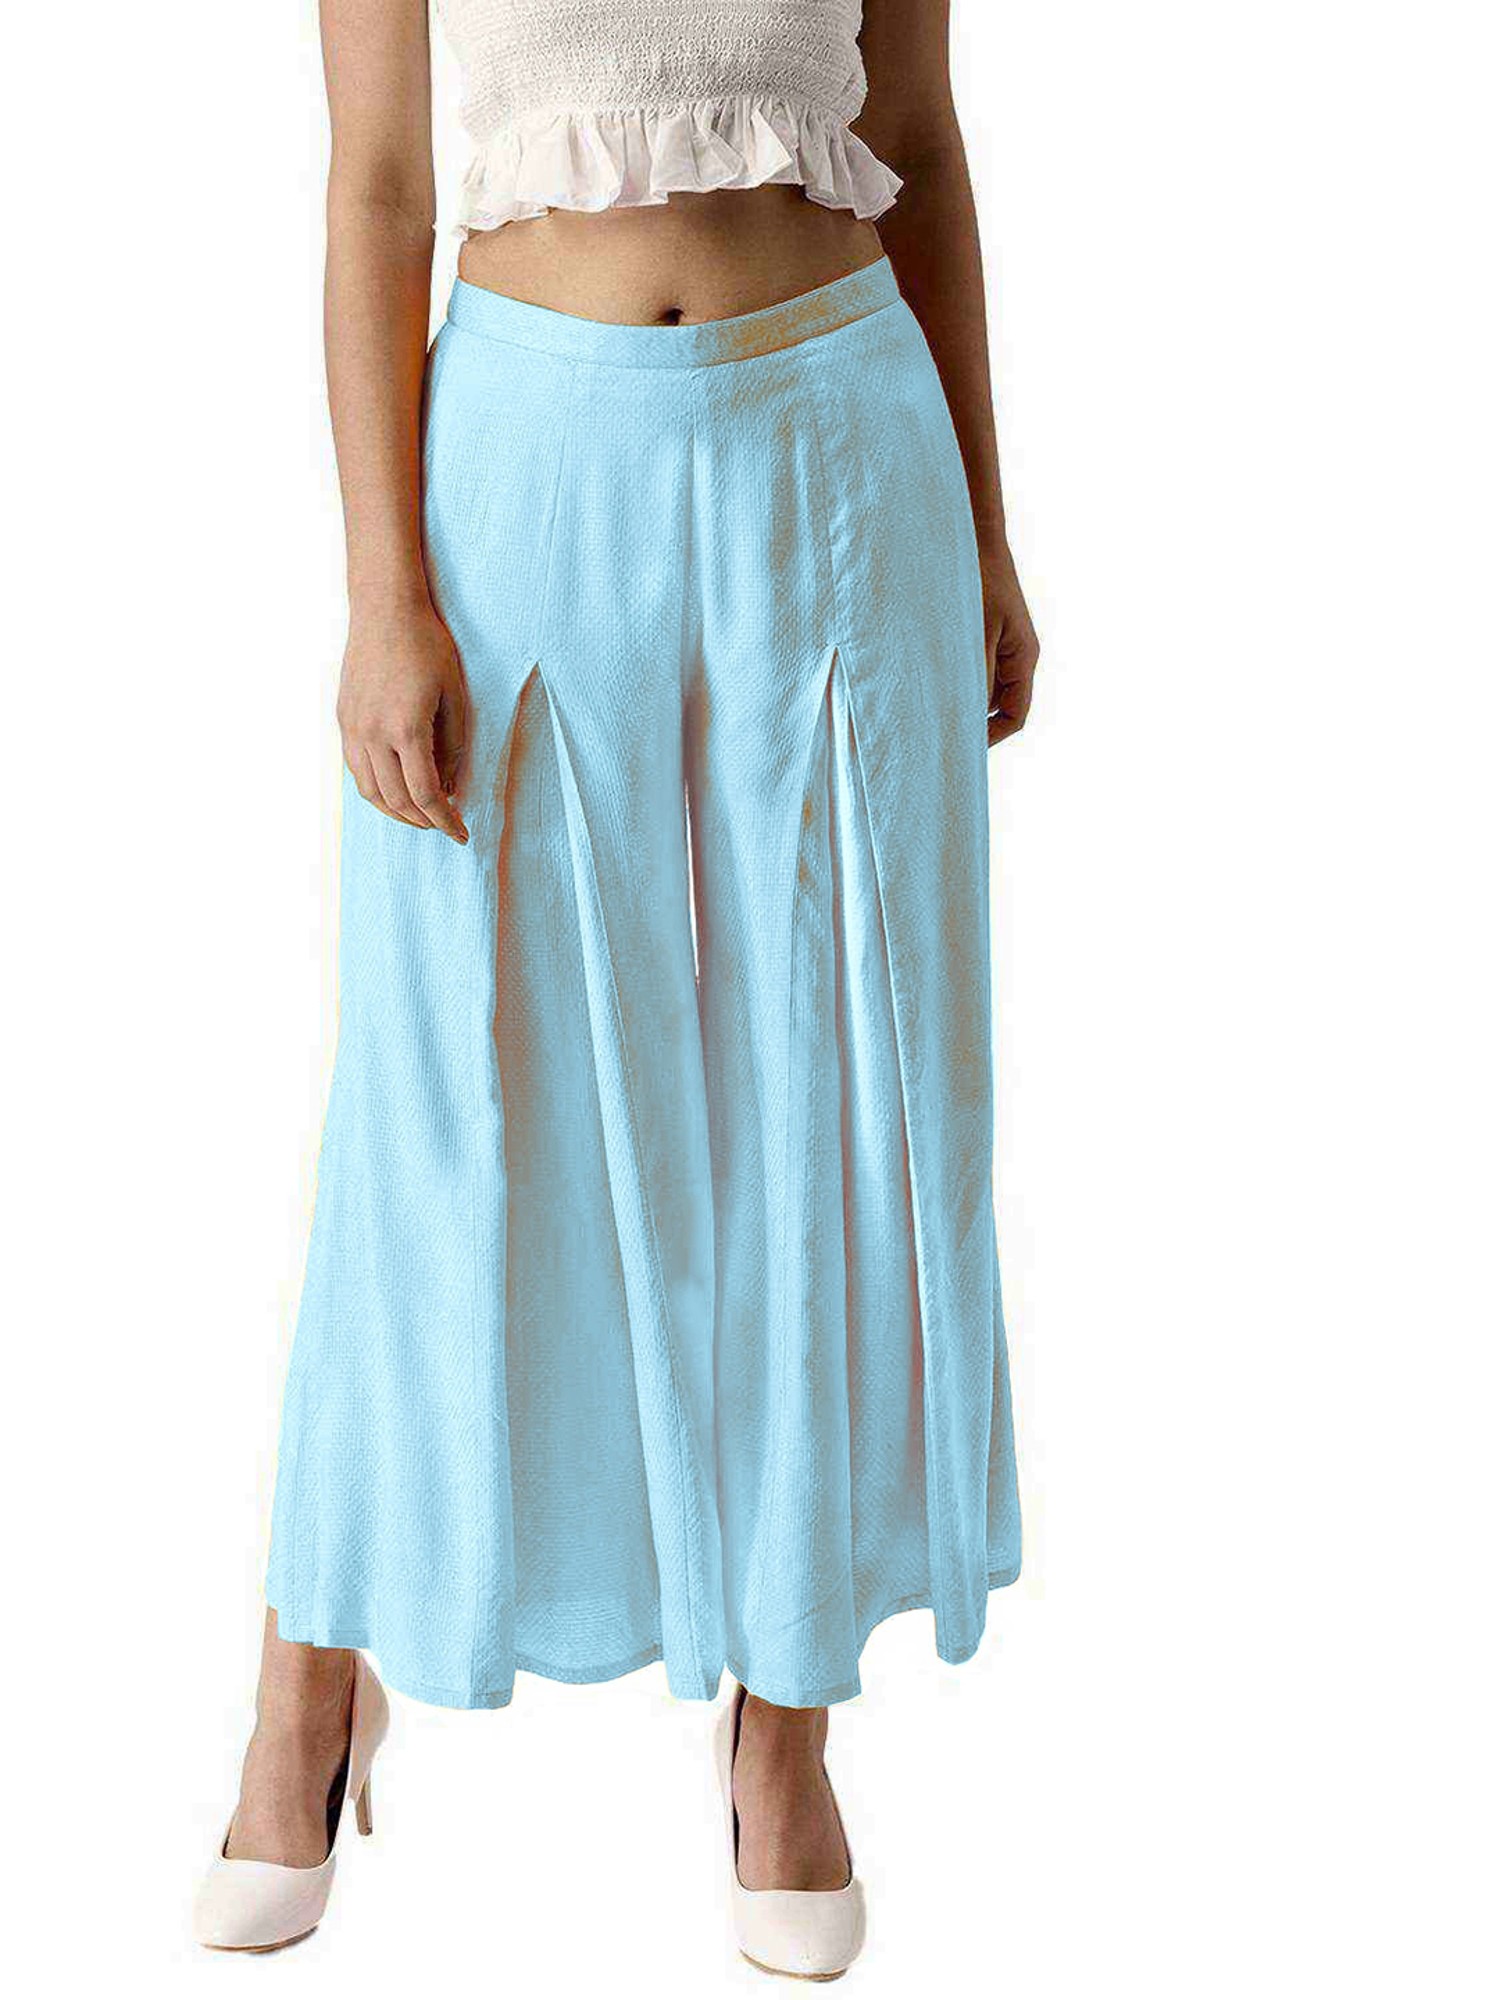 Shop Ink Blue Palazzo Pants by Prisma - Stylish and Comfortable